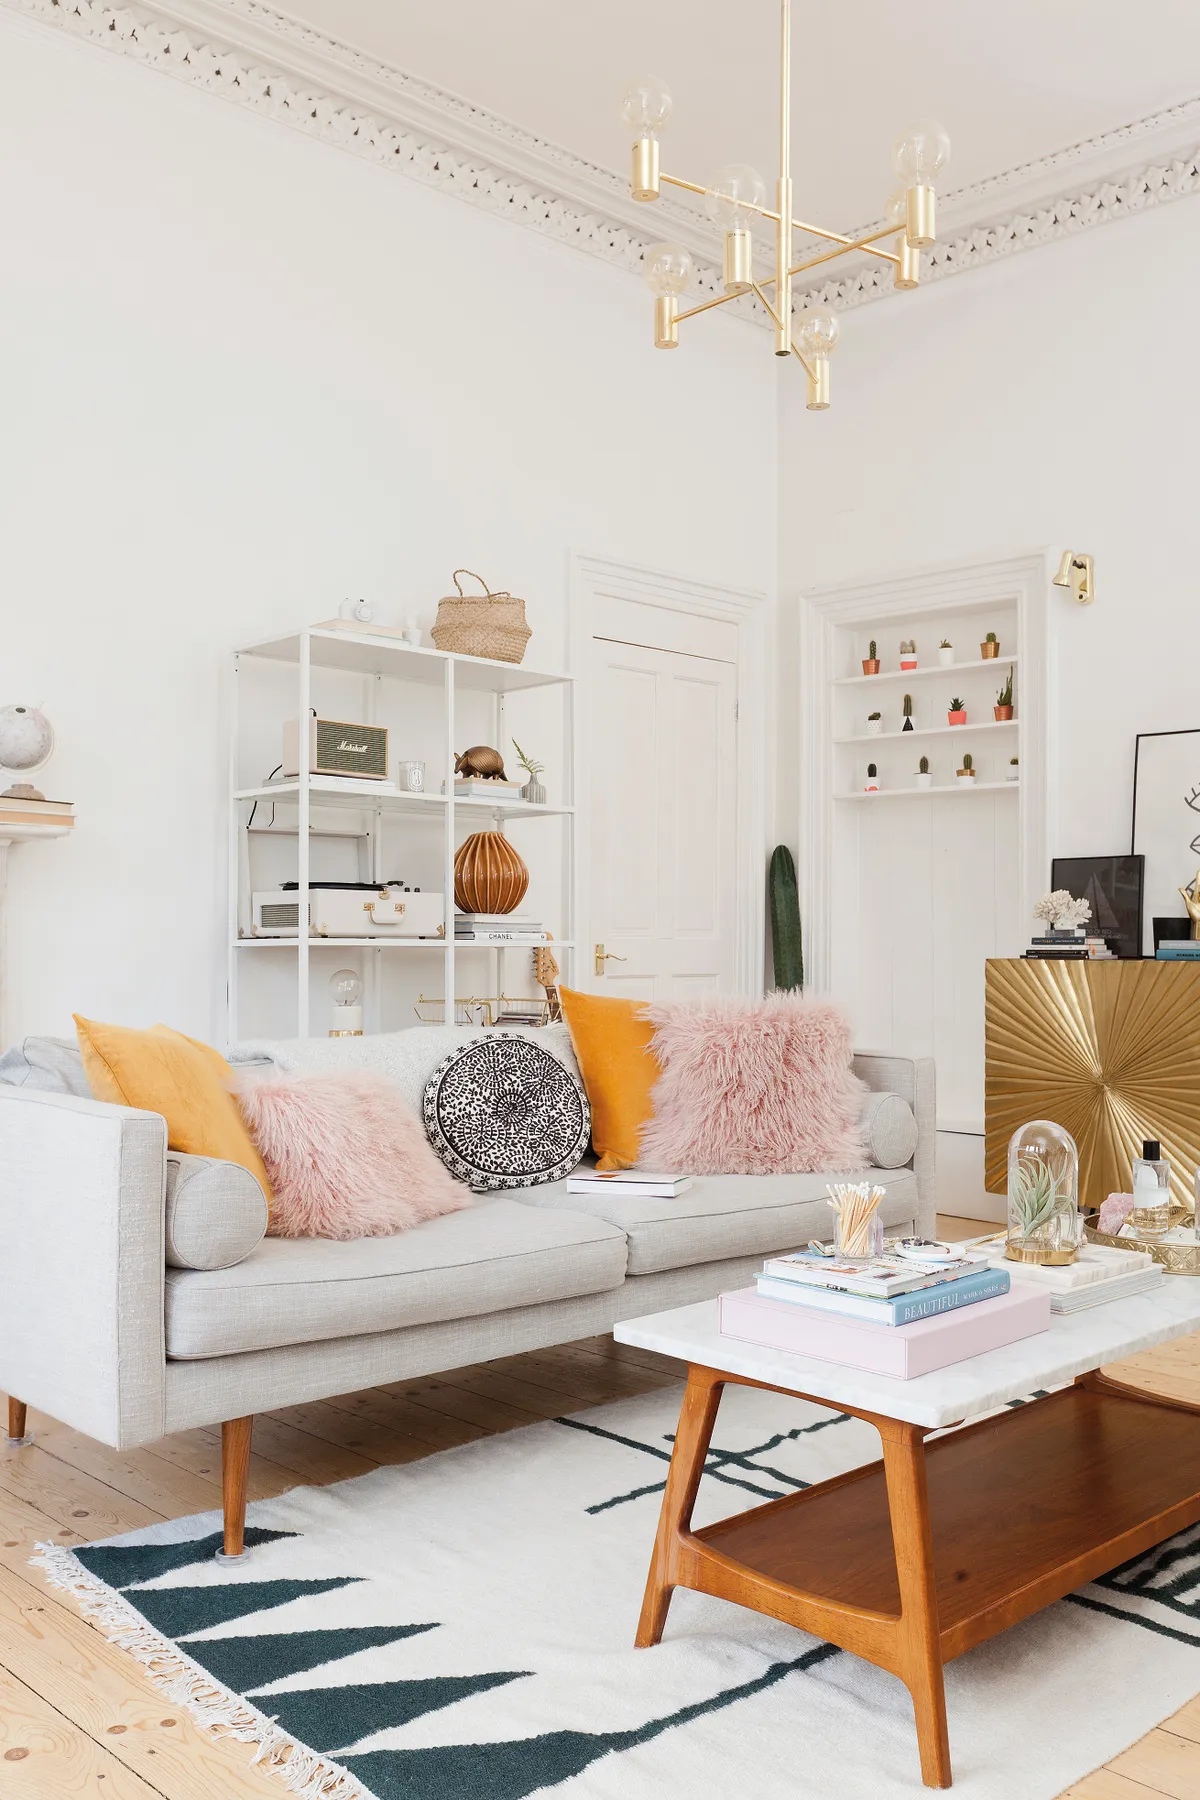 Regularly changing accessories in the living room allows for a quick and easy refresh. ‘While I’m tempted to buy new pieces to give the space a new lease of life,’ says Kate, ‘I know that having a switch up does the job just as well’